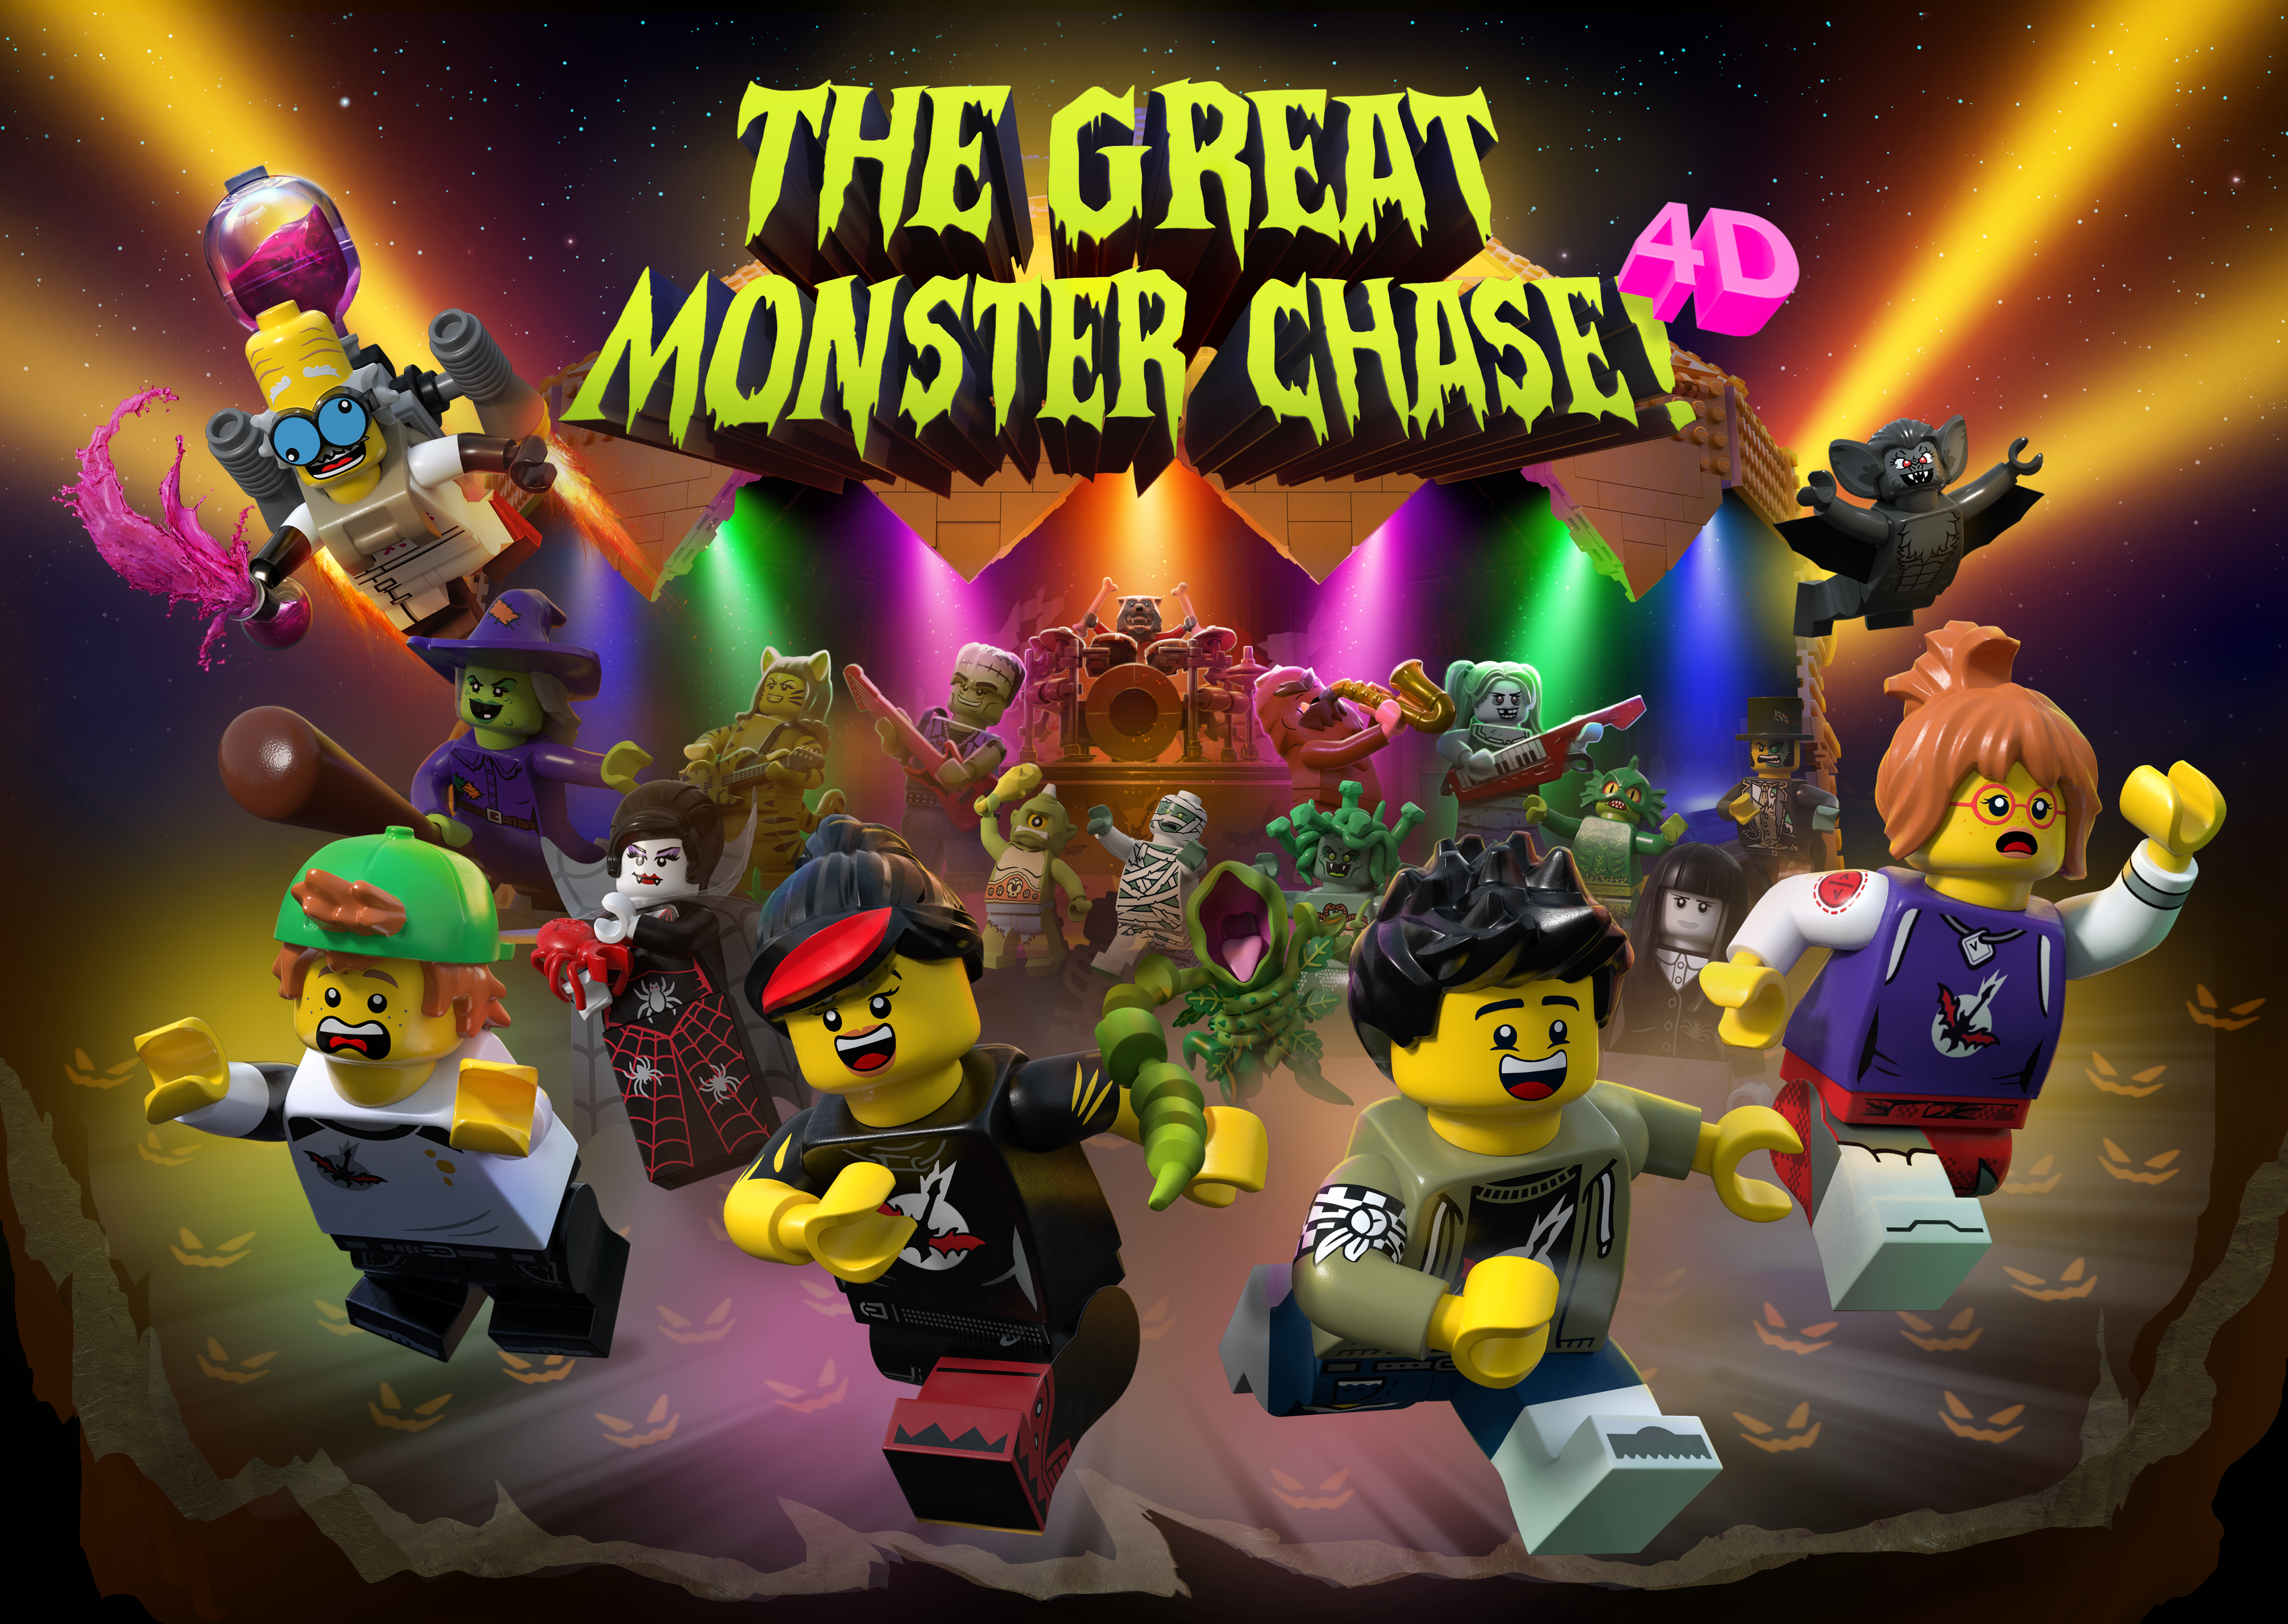 The Great Monster Chase